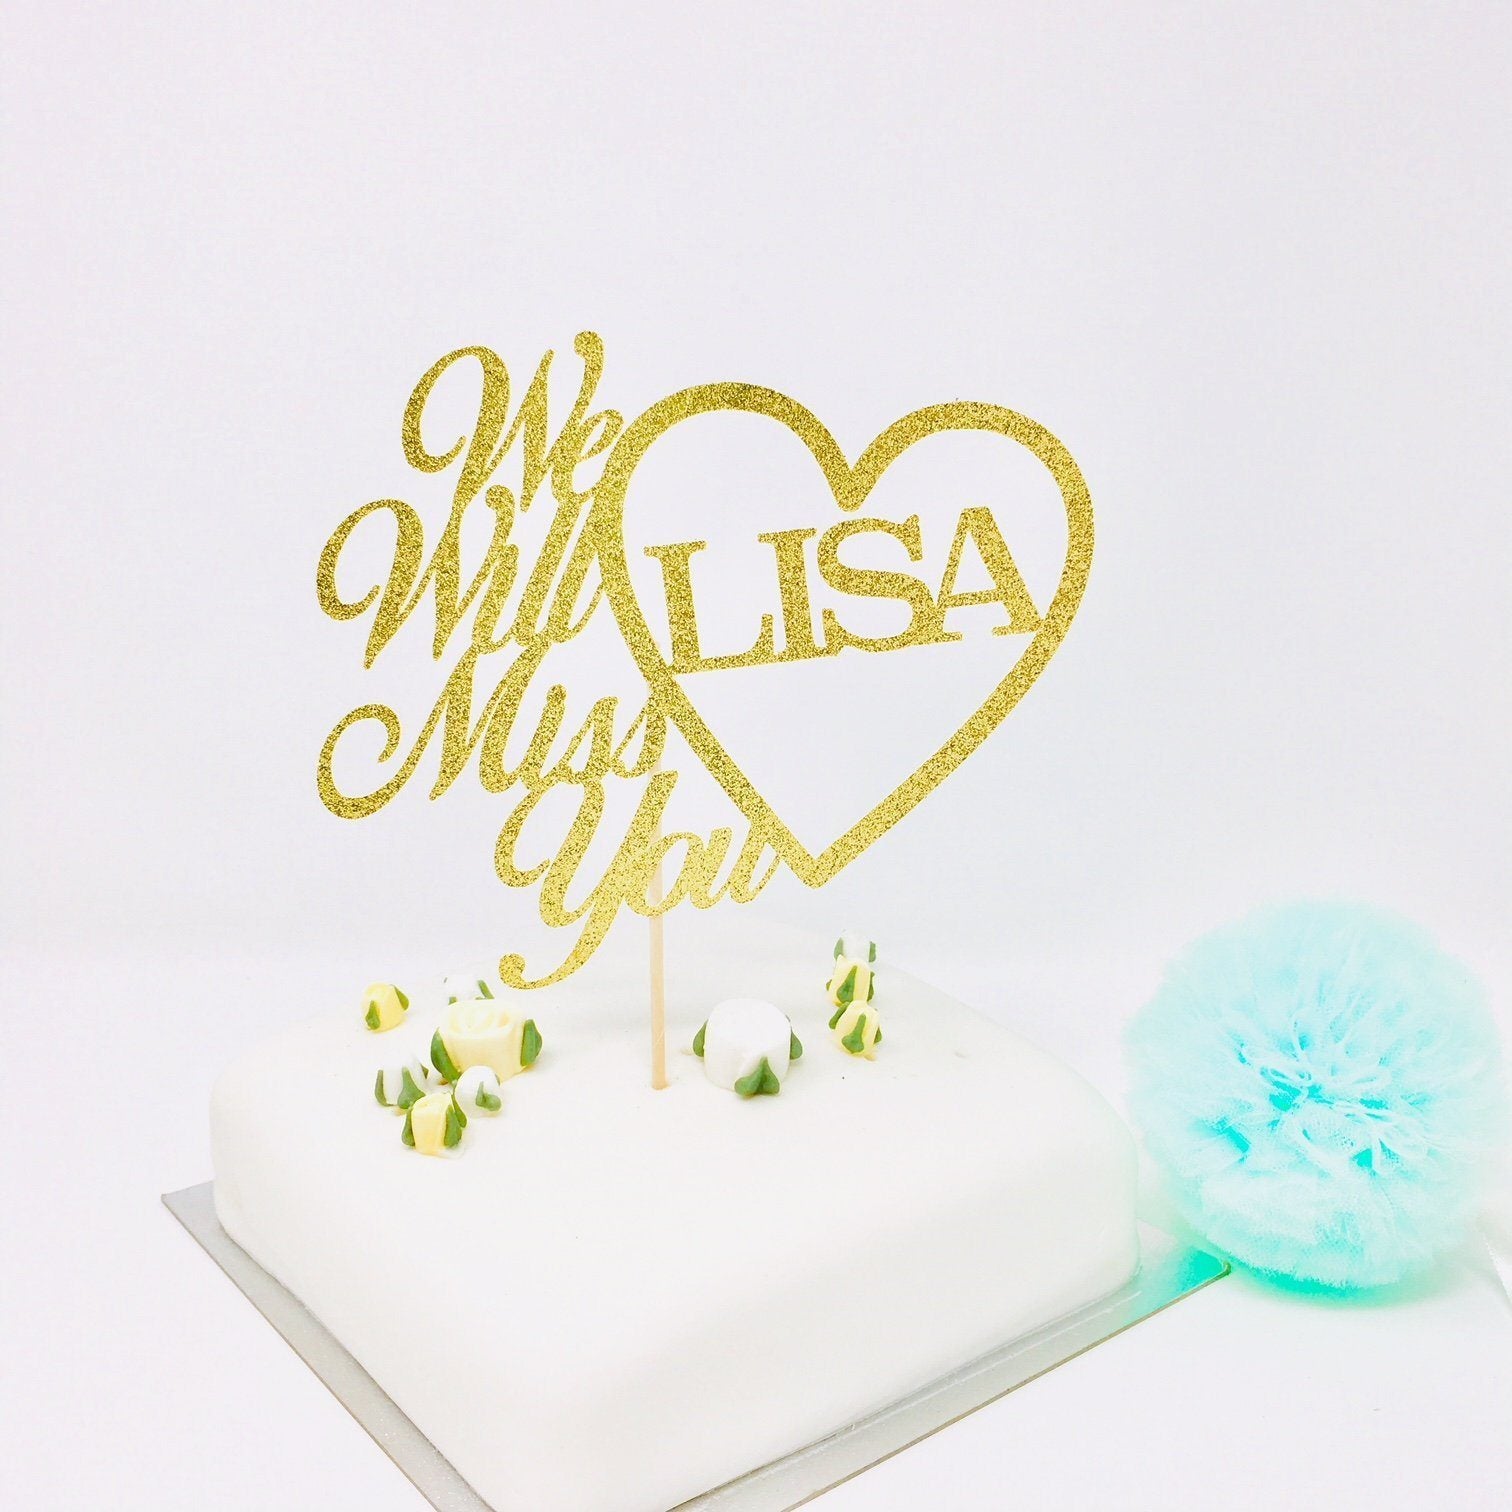 Personalised We Will Miss You Cake Topper Retirement Cake Topper